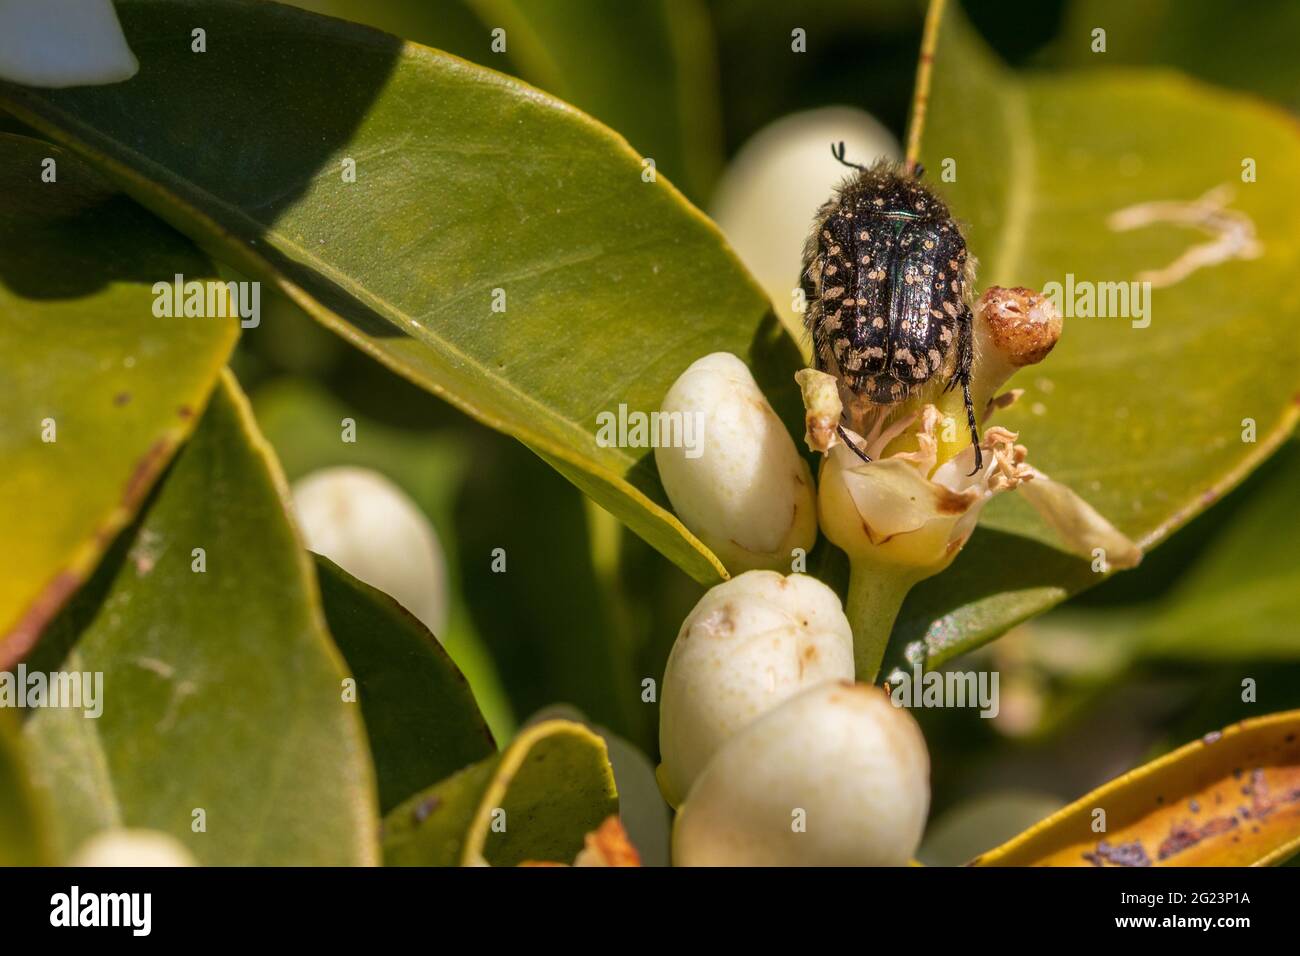 Oxythyrea funesta, Mediterranean Spotted Chafer Beetle on the Blossom of a Lemon Tree Stock Photo